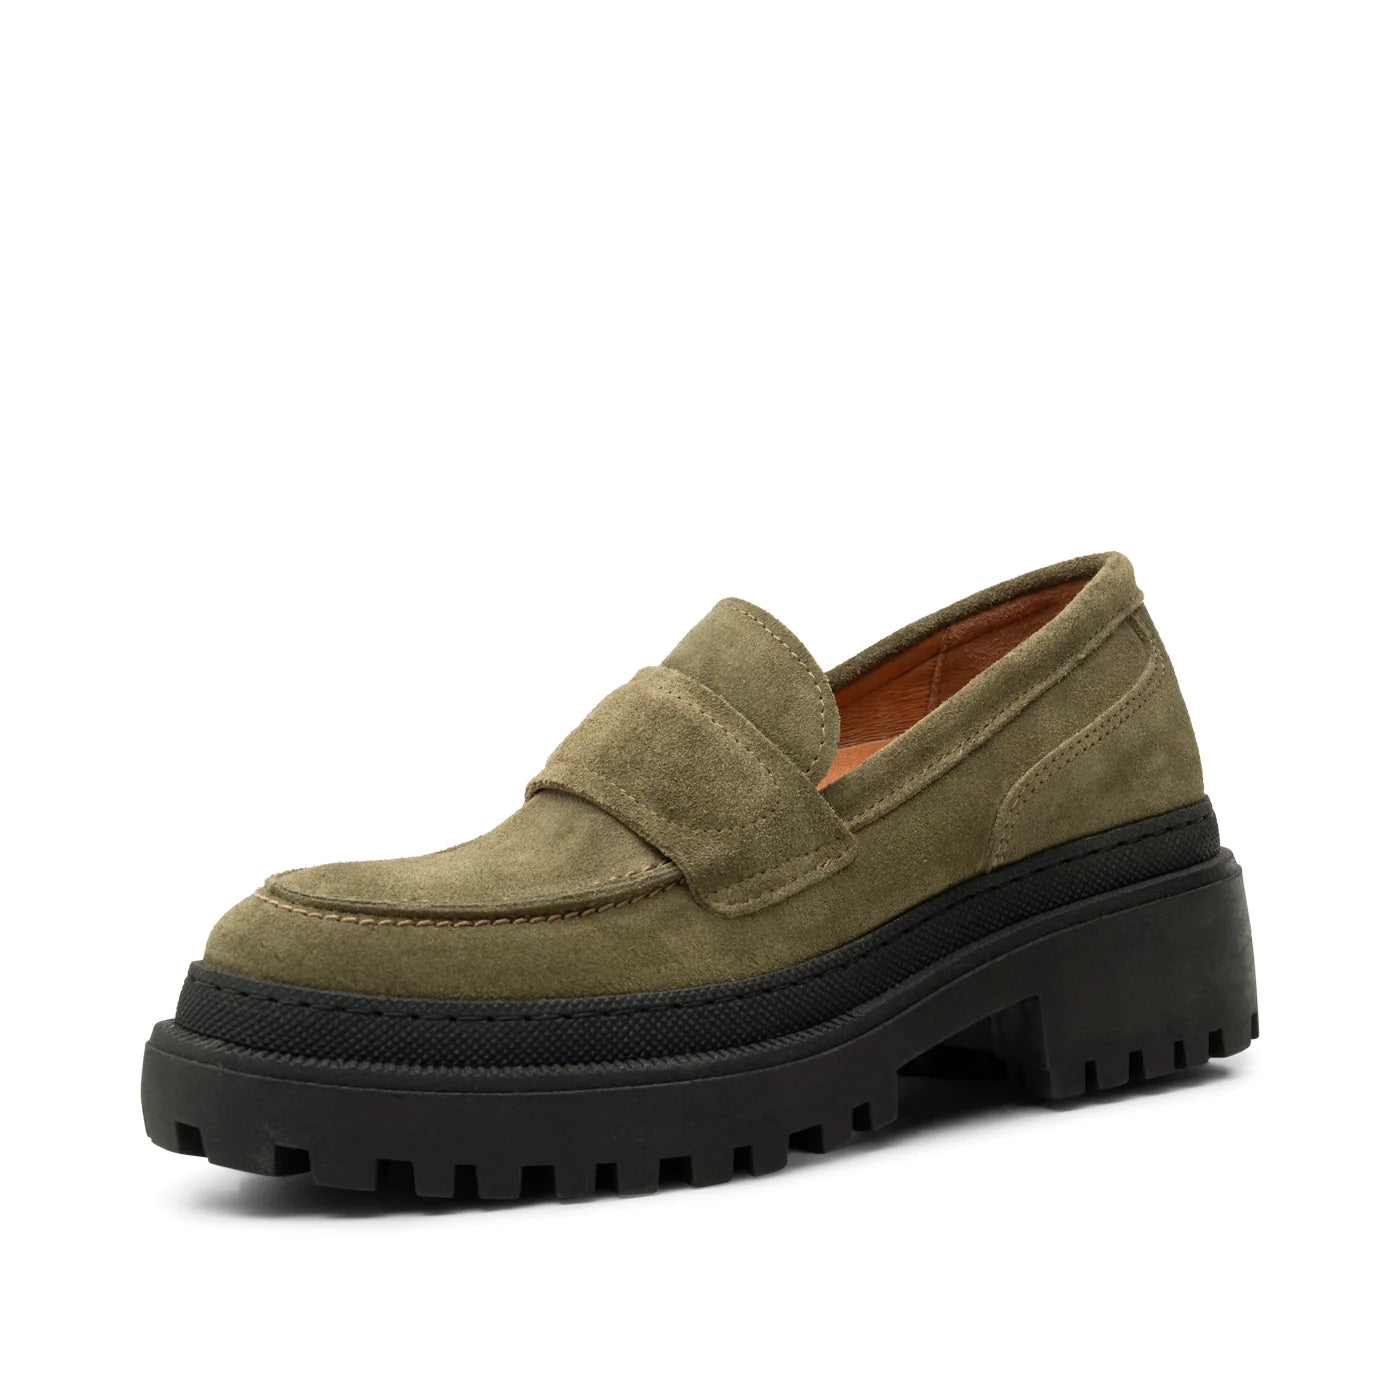 Iona Loafer in Suede - Algae